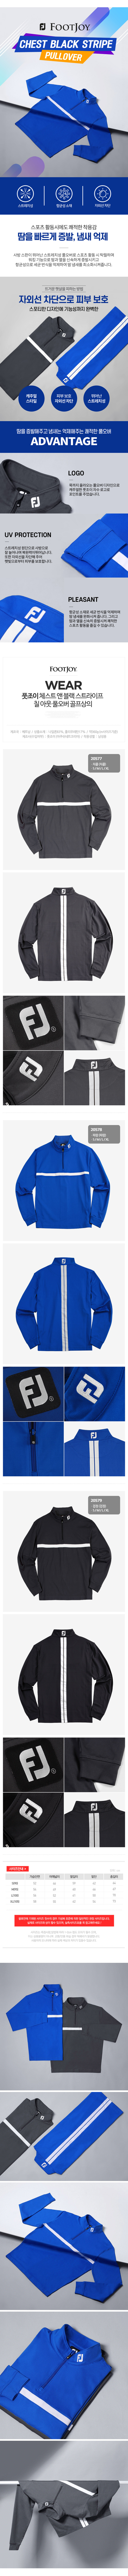 footjoy_2015_chest_back_stripe_chill_out_pullover.jpg